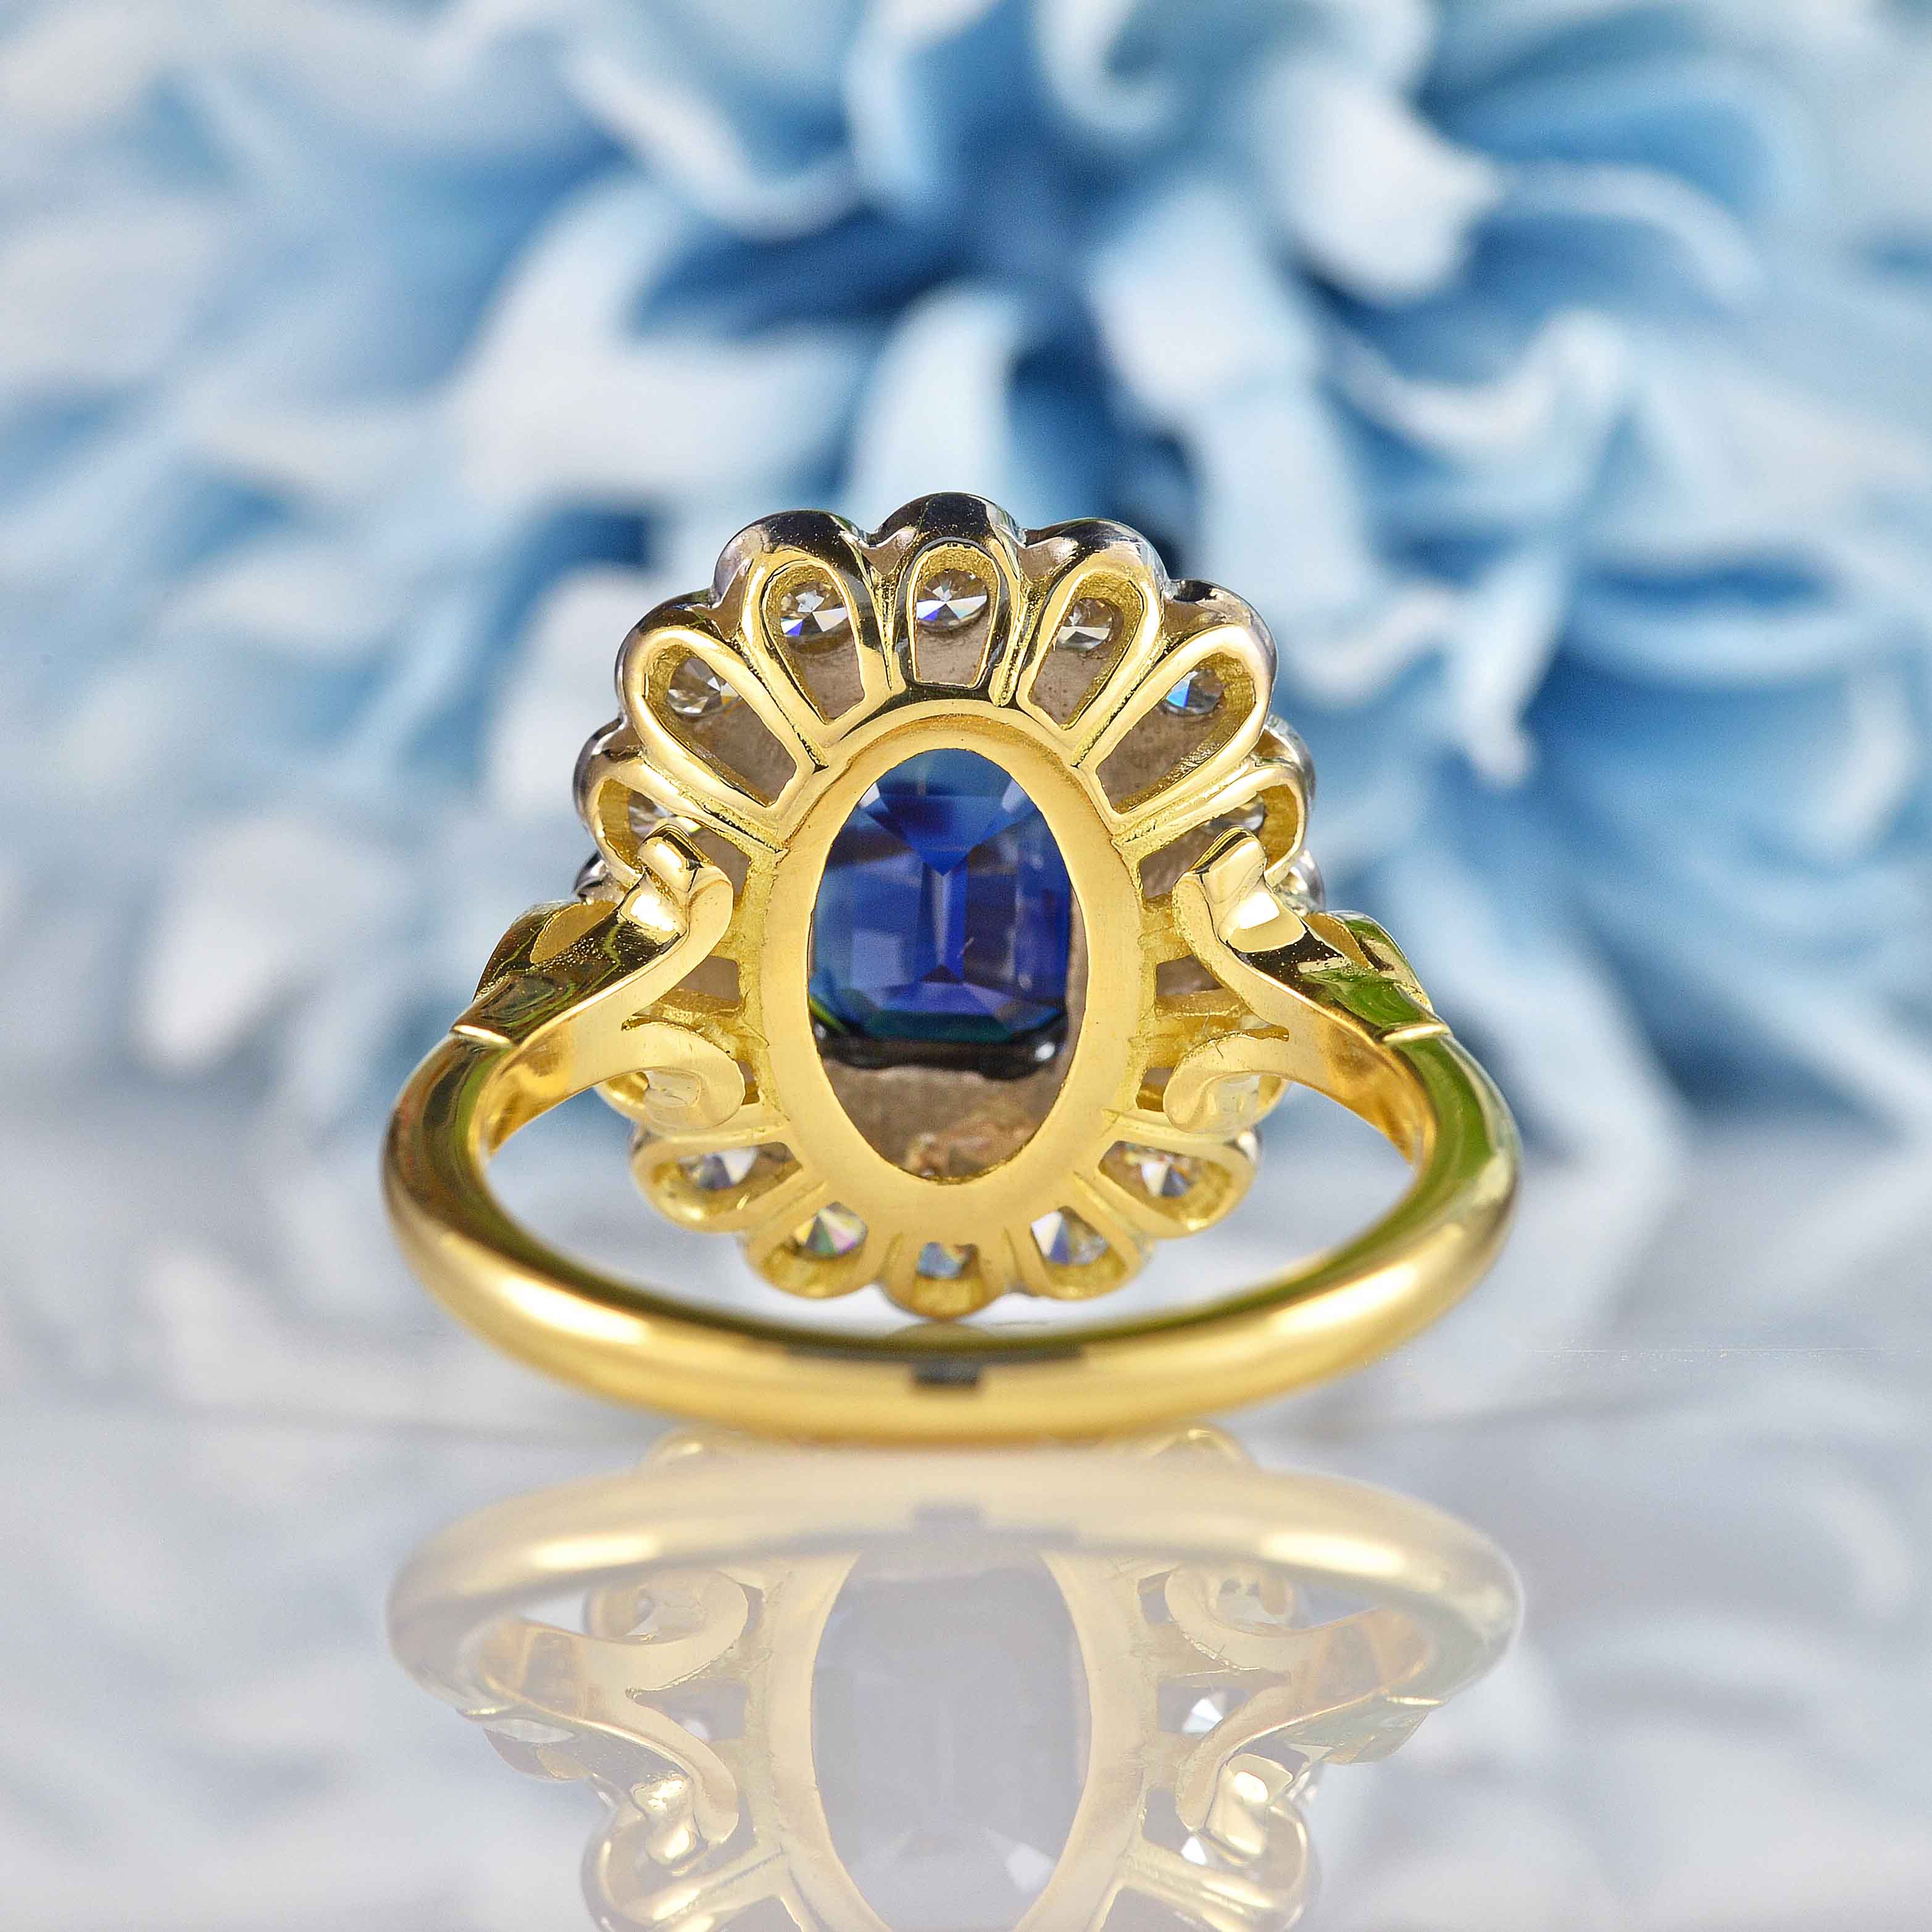 Ellibelle Jewellery Edwardian Style Sapphire & Diamond 18ct Gold Cluster Engagement Ring